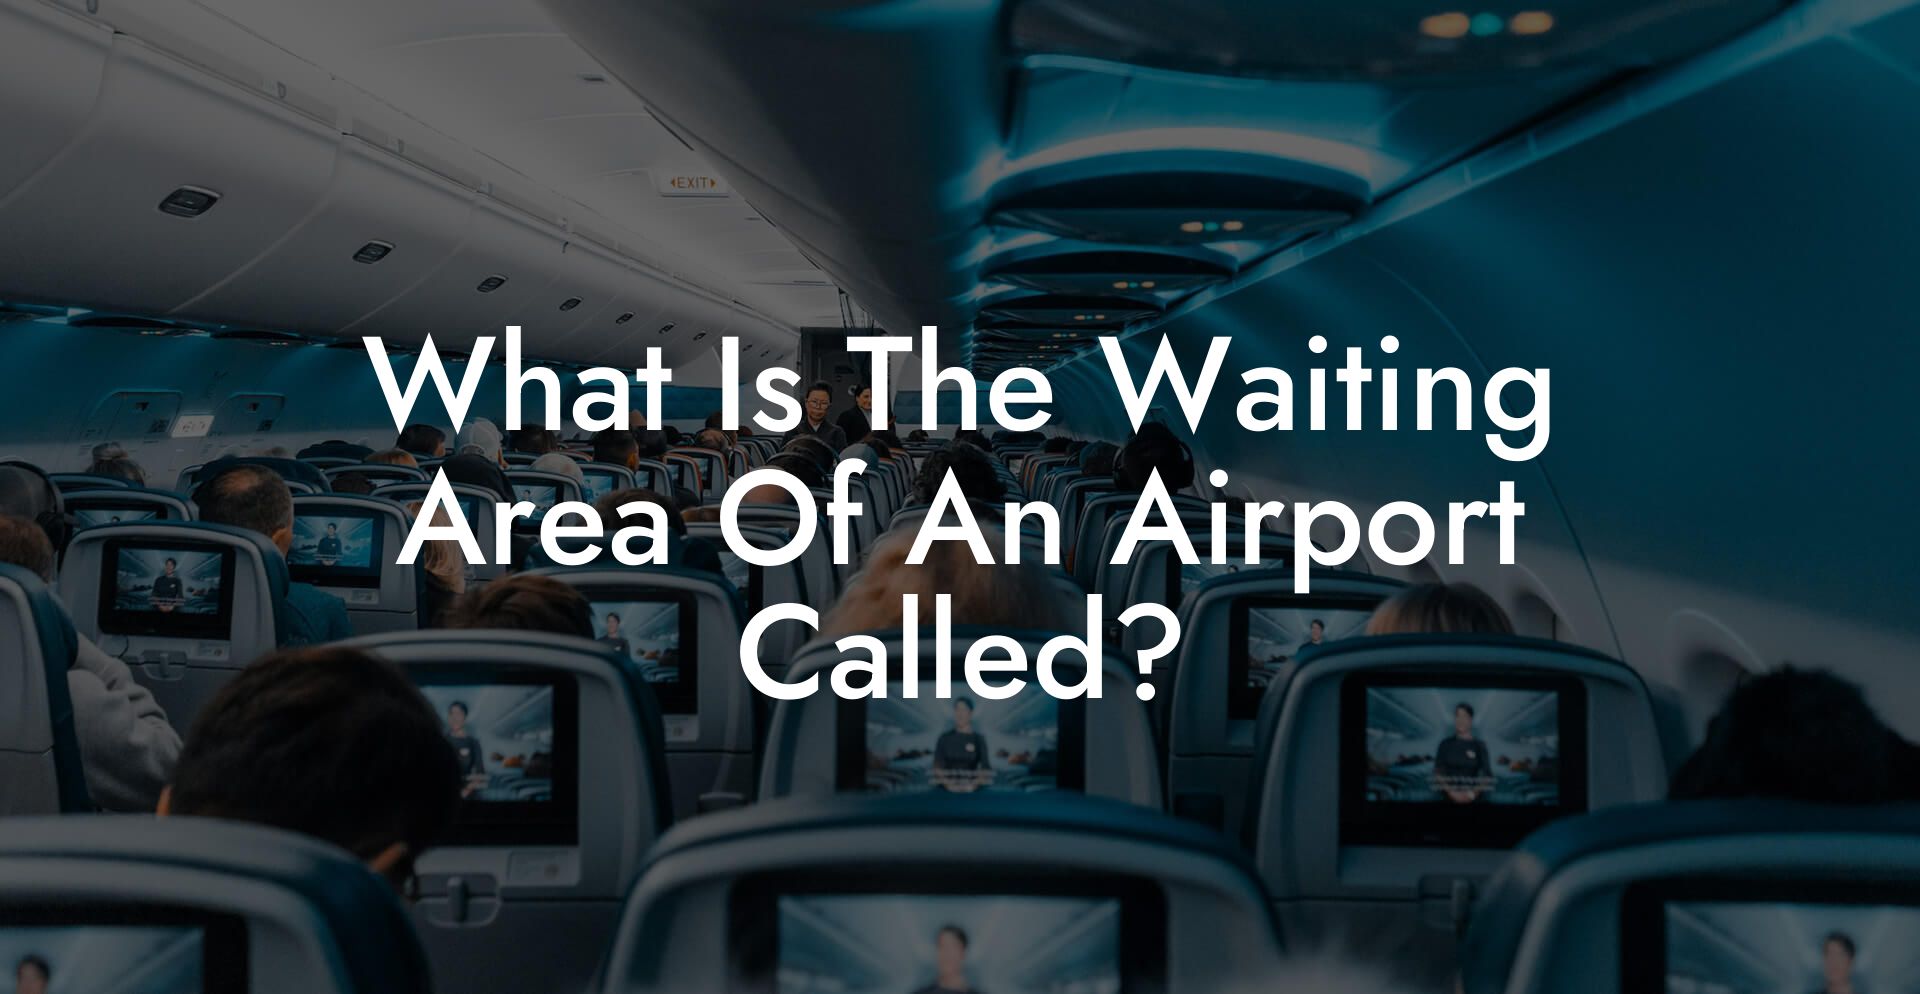 What Is The Waiting Area Of An Airport Called?